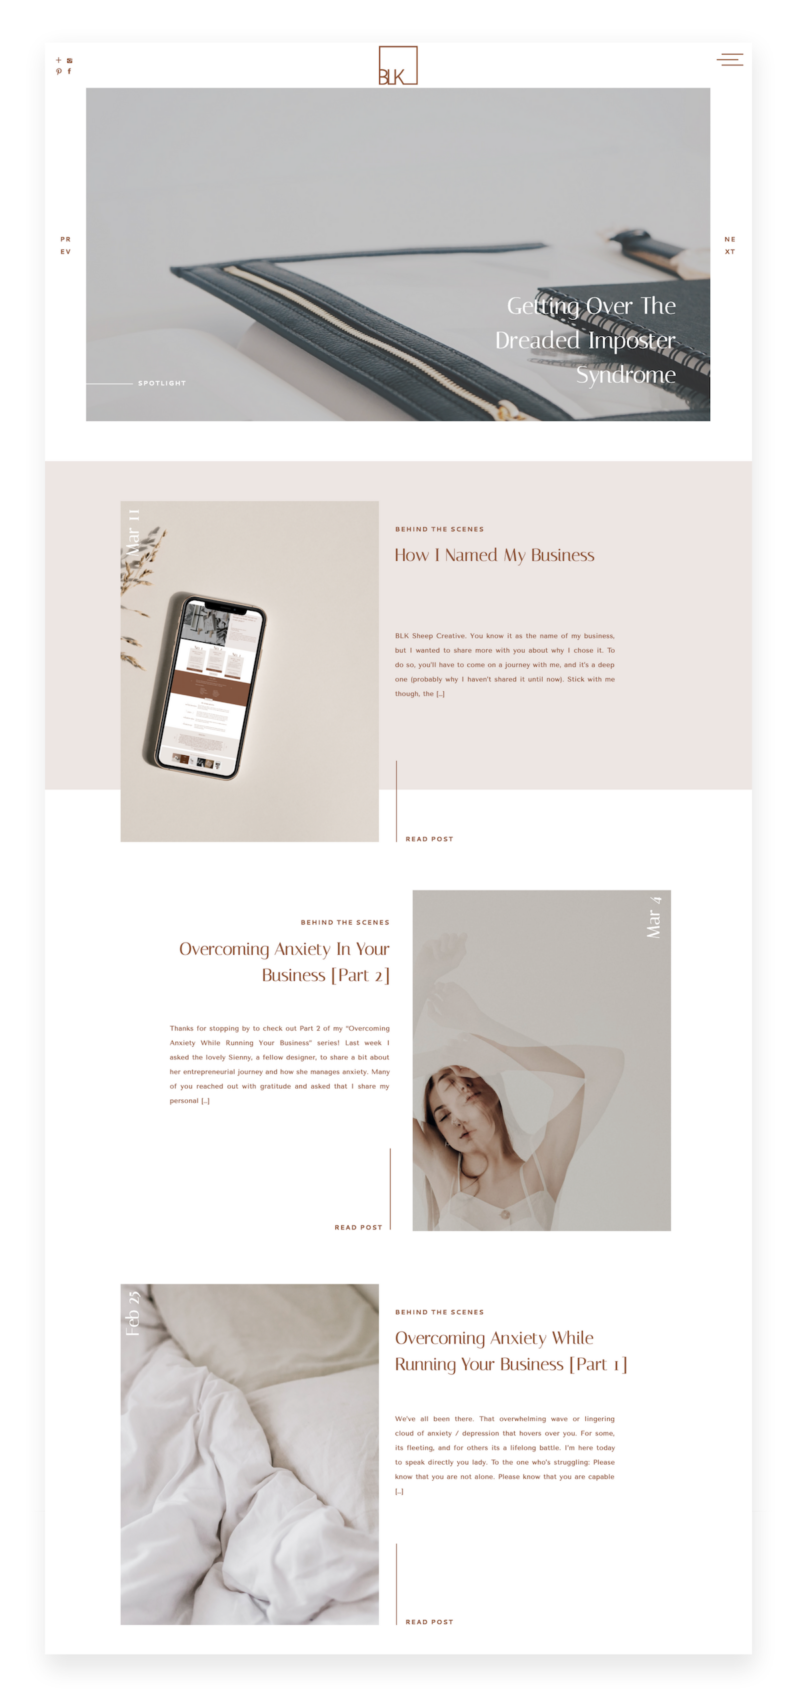 A Modern Branding and Web Design Boutique Template